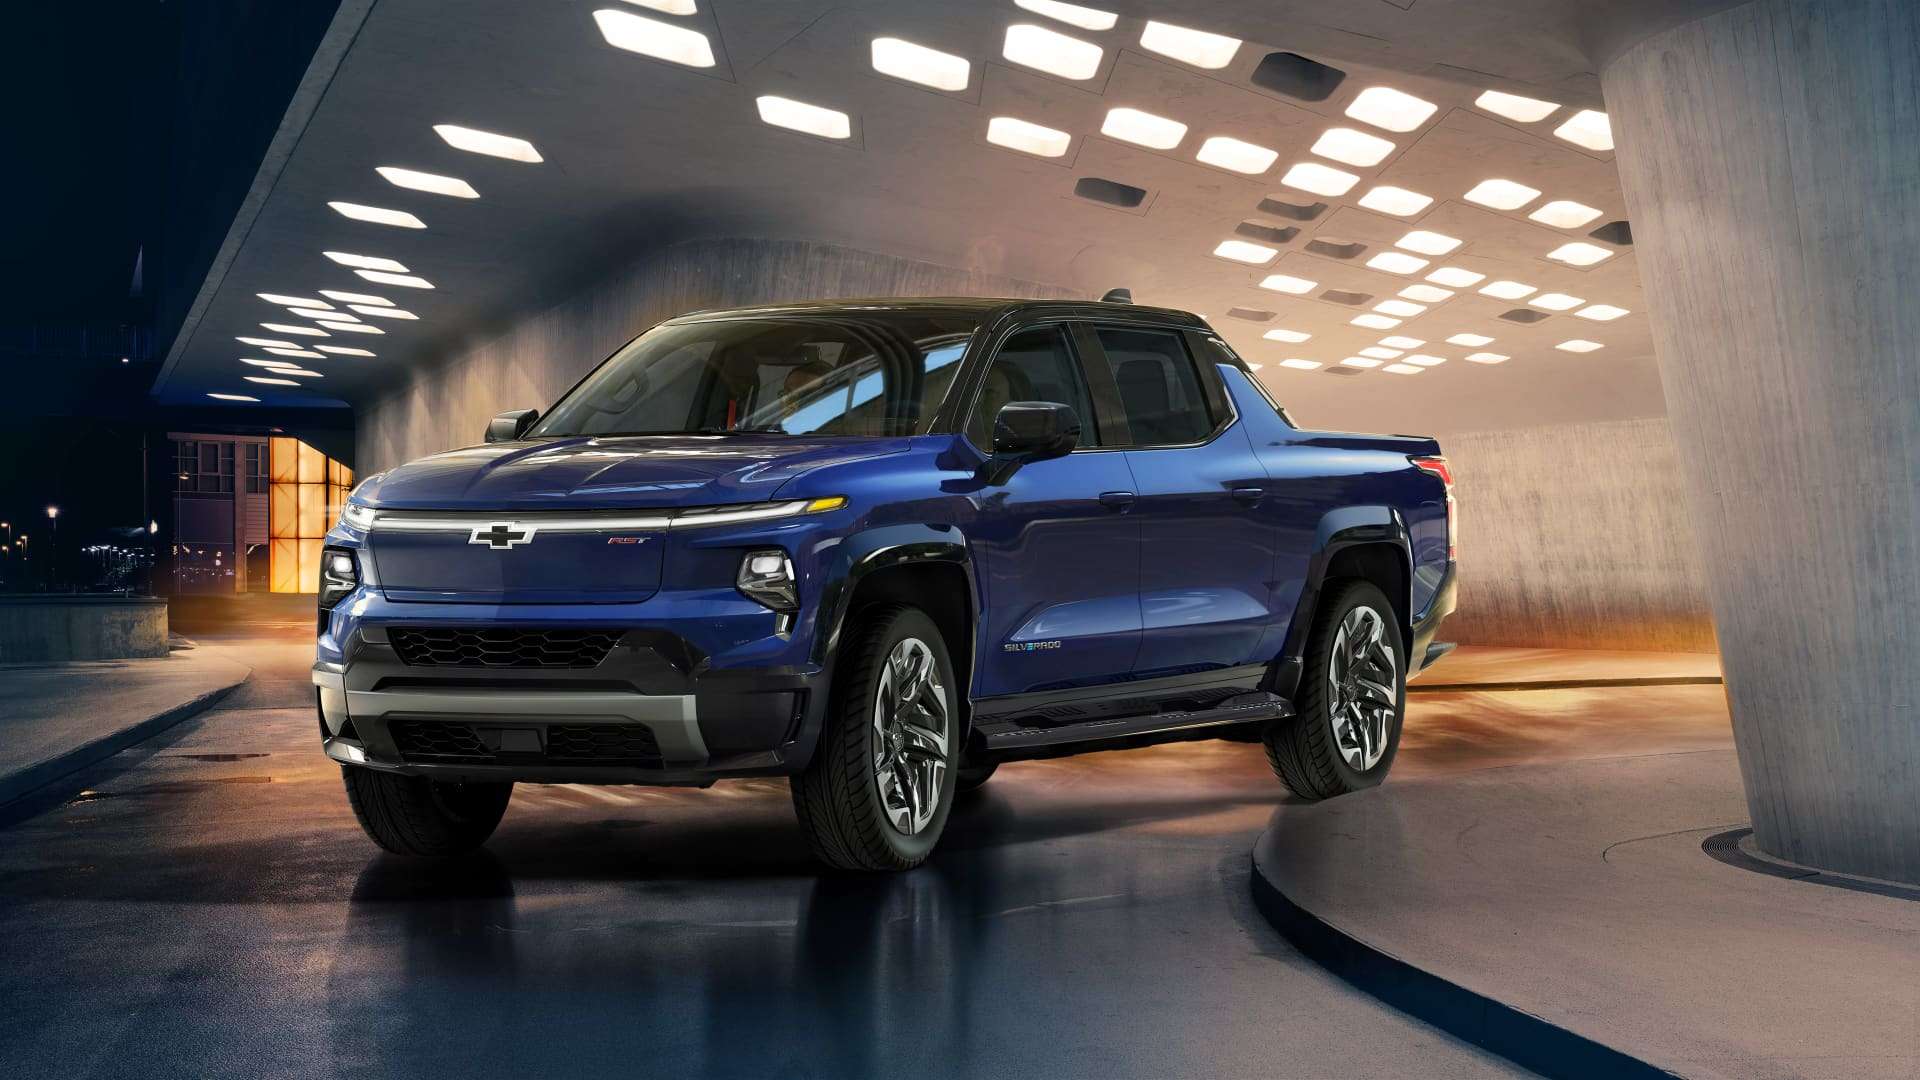 general-motors-now-has-140,000-reservations-for-its-electric-chevrolet-silverado-pickup,-due-in-2023